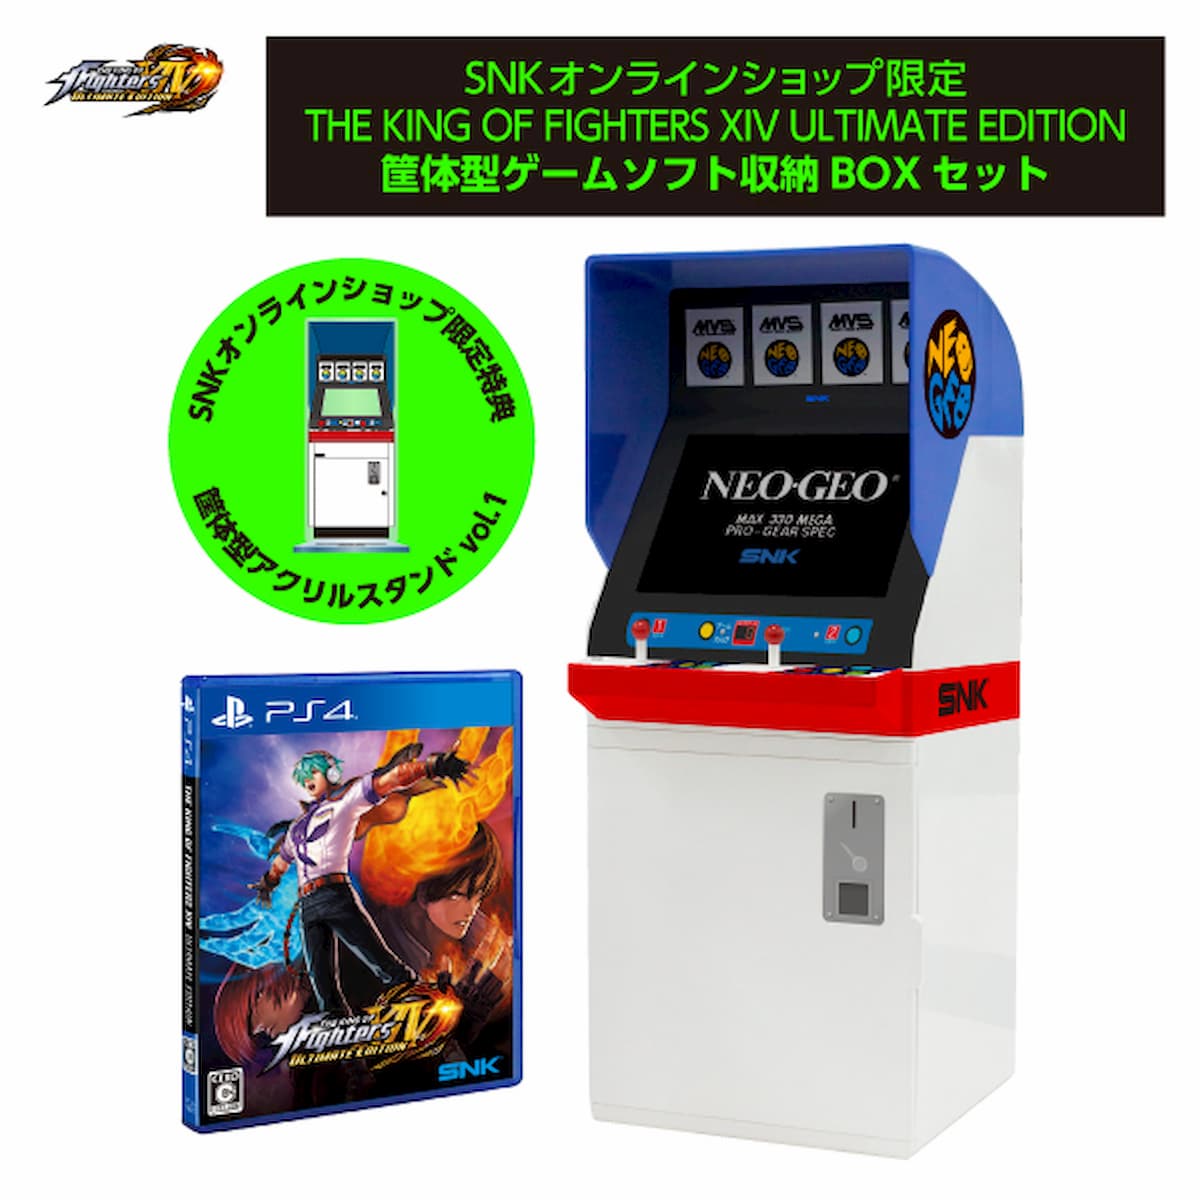 THE KING OF FIGHTERS XIV ULTIMATE EDITION 筐体型ゲームソフト収納BOXセット - PS4